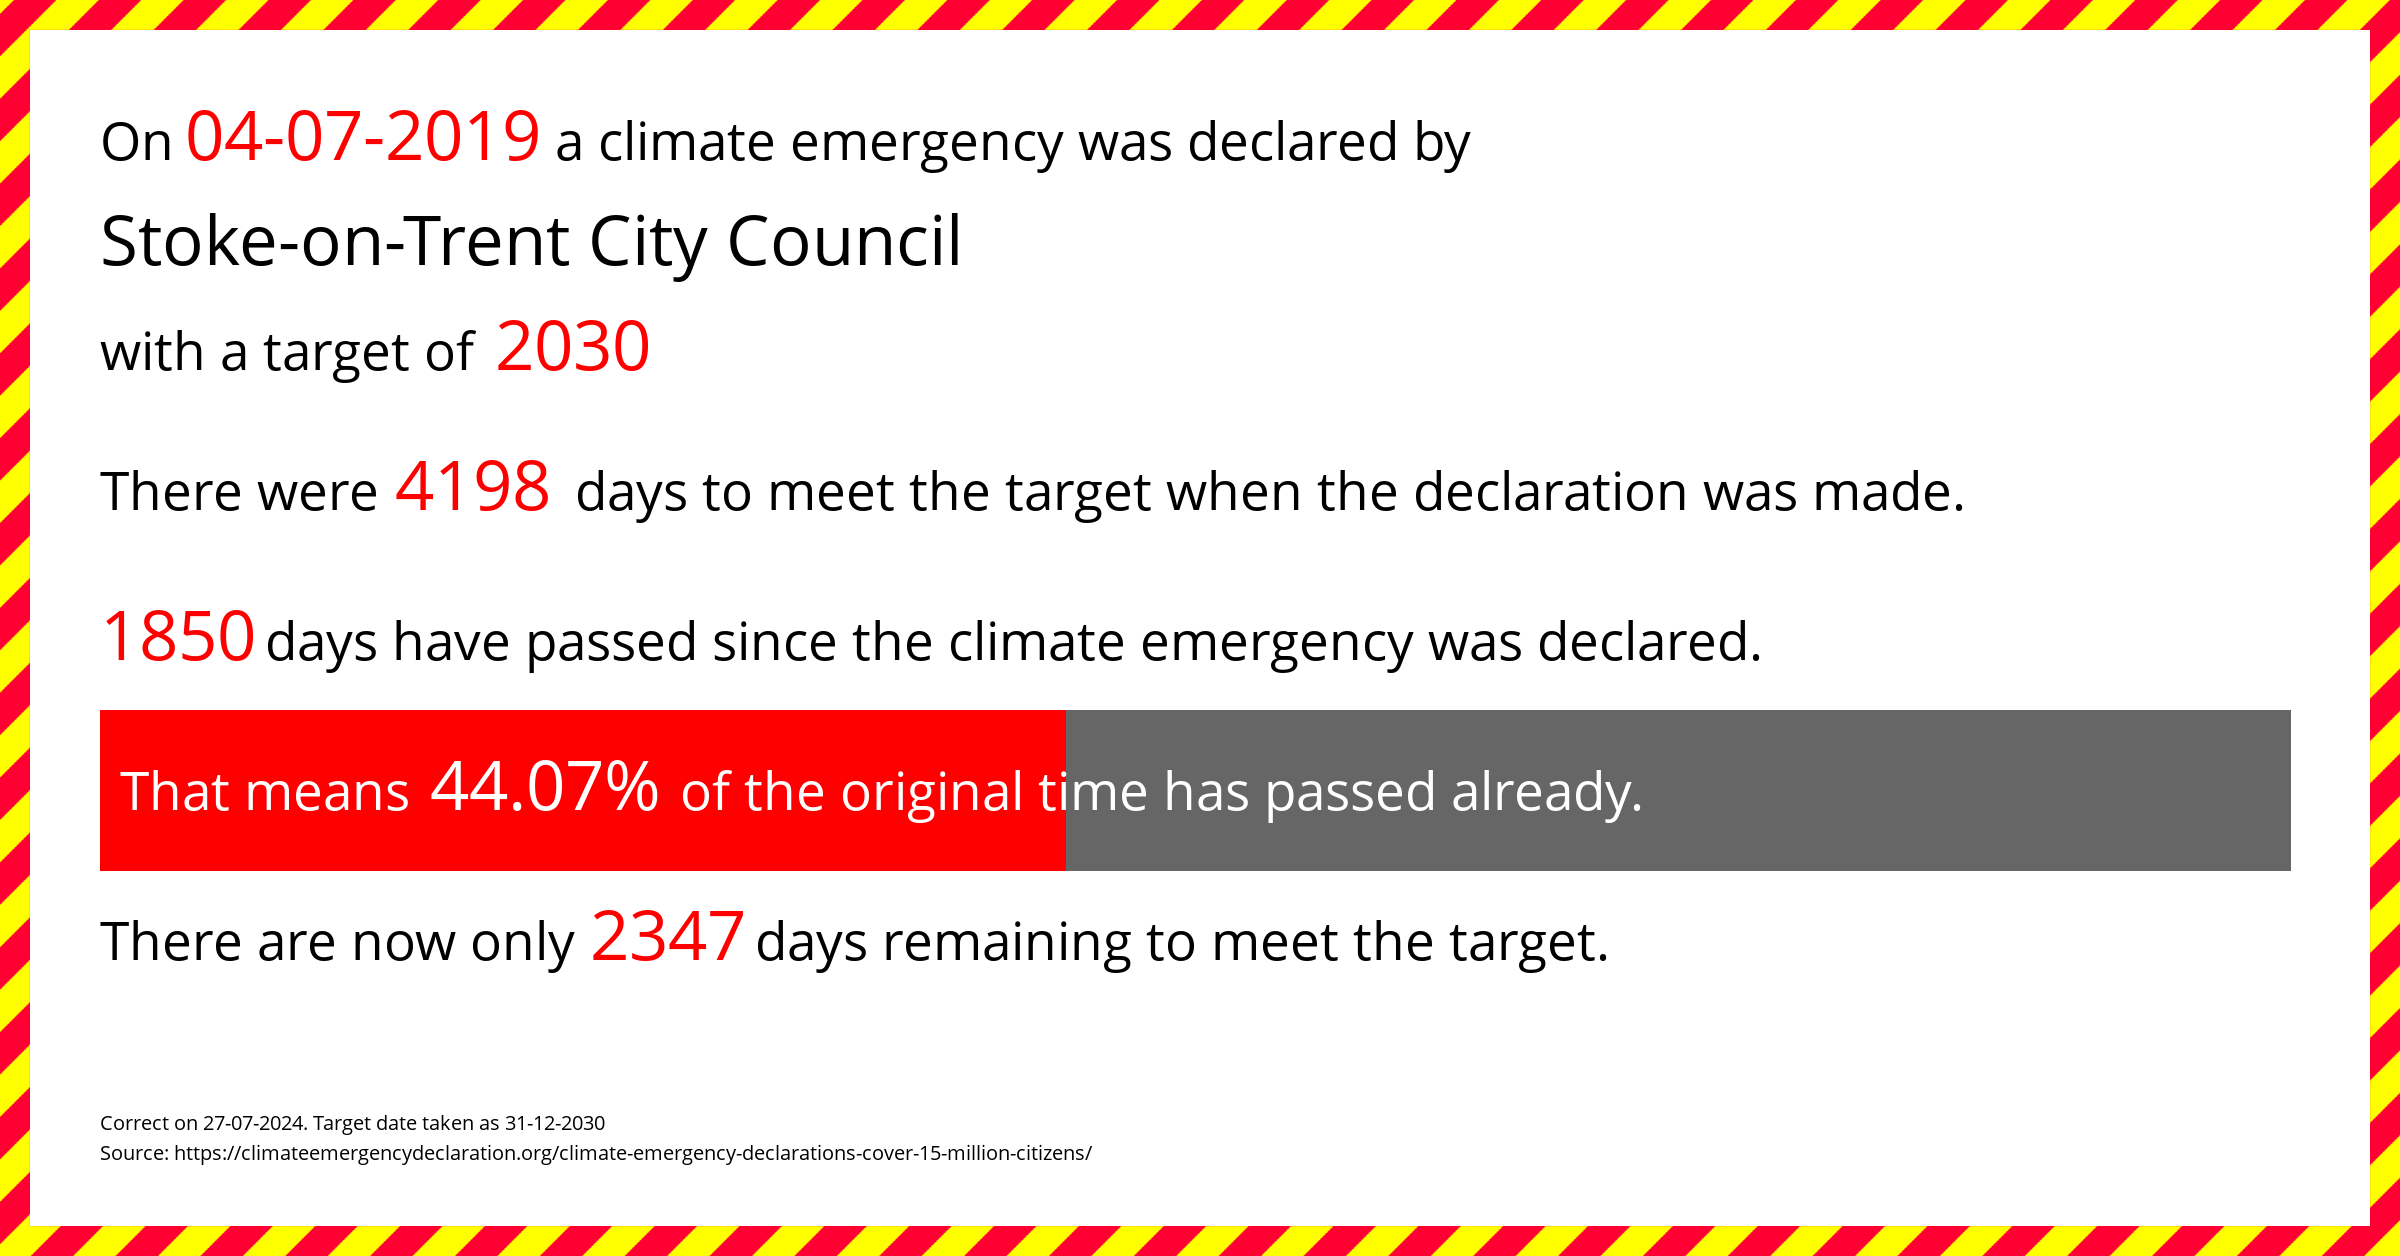 Stoke-on-Trent City Council declared a Climate emergency on Thursday 4th July 2019, with a target of 2030.